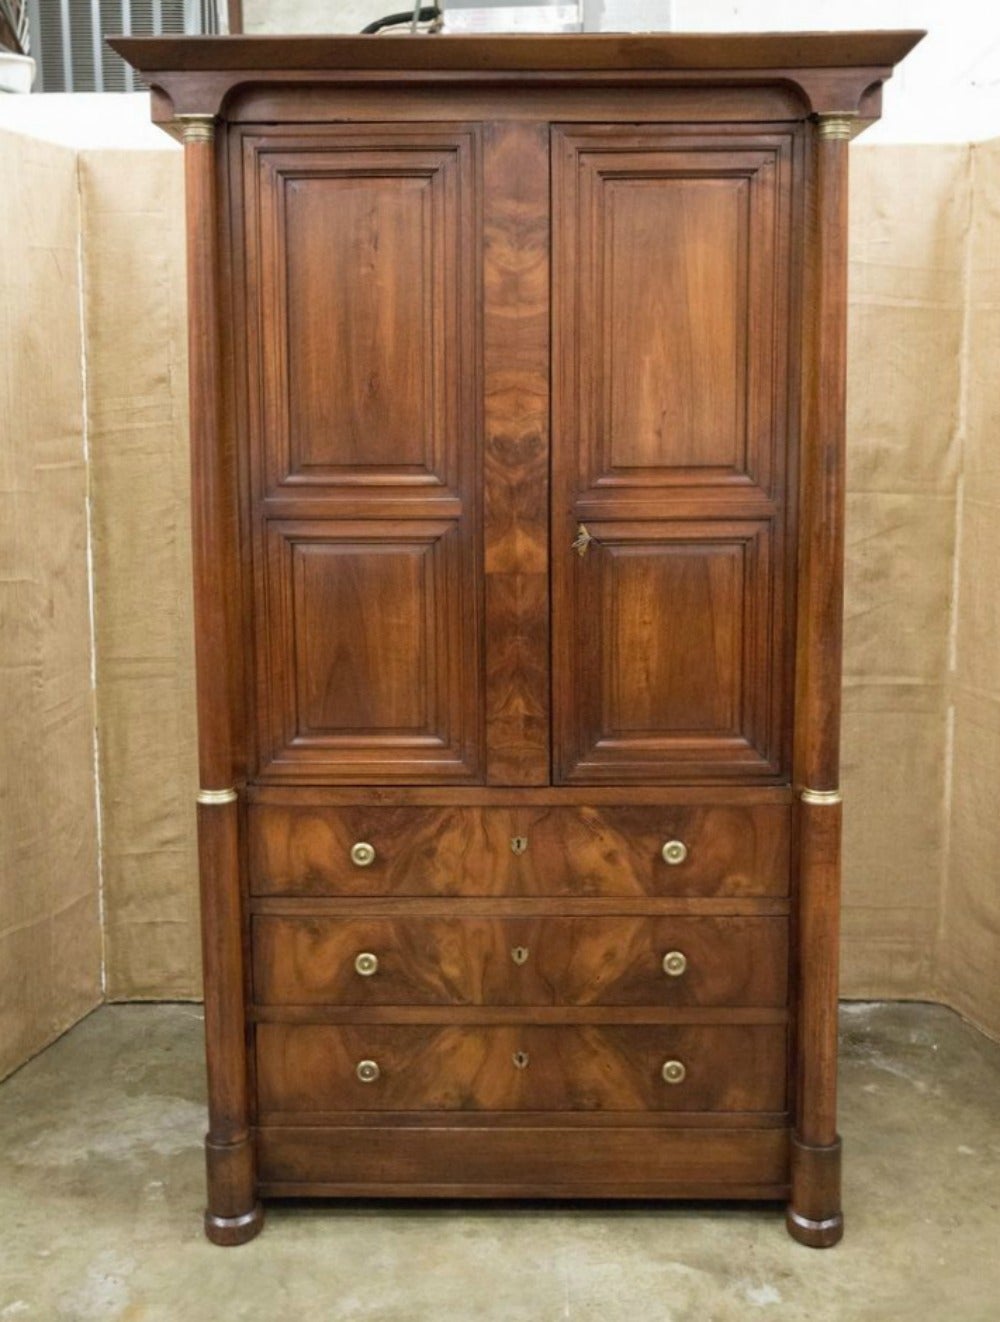 Fine French Empire period linen press of monumental size, handcrafted of walnut with a bookmatched front by master artisans from the Lyon region of France during the First Empire of Napoleon. Two upper cabinet doors flanked by columns fitted with